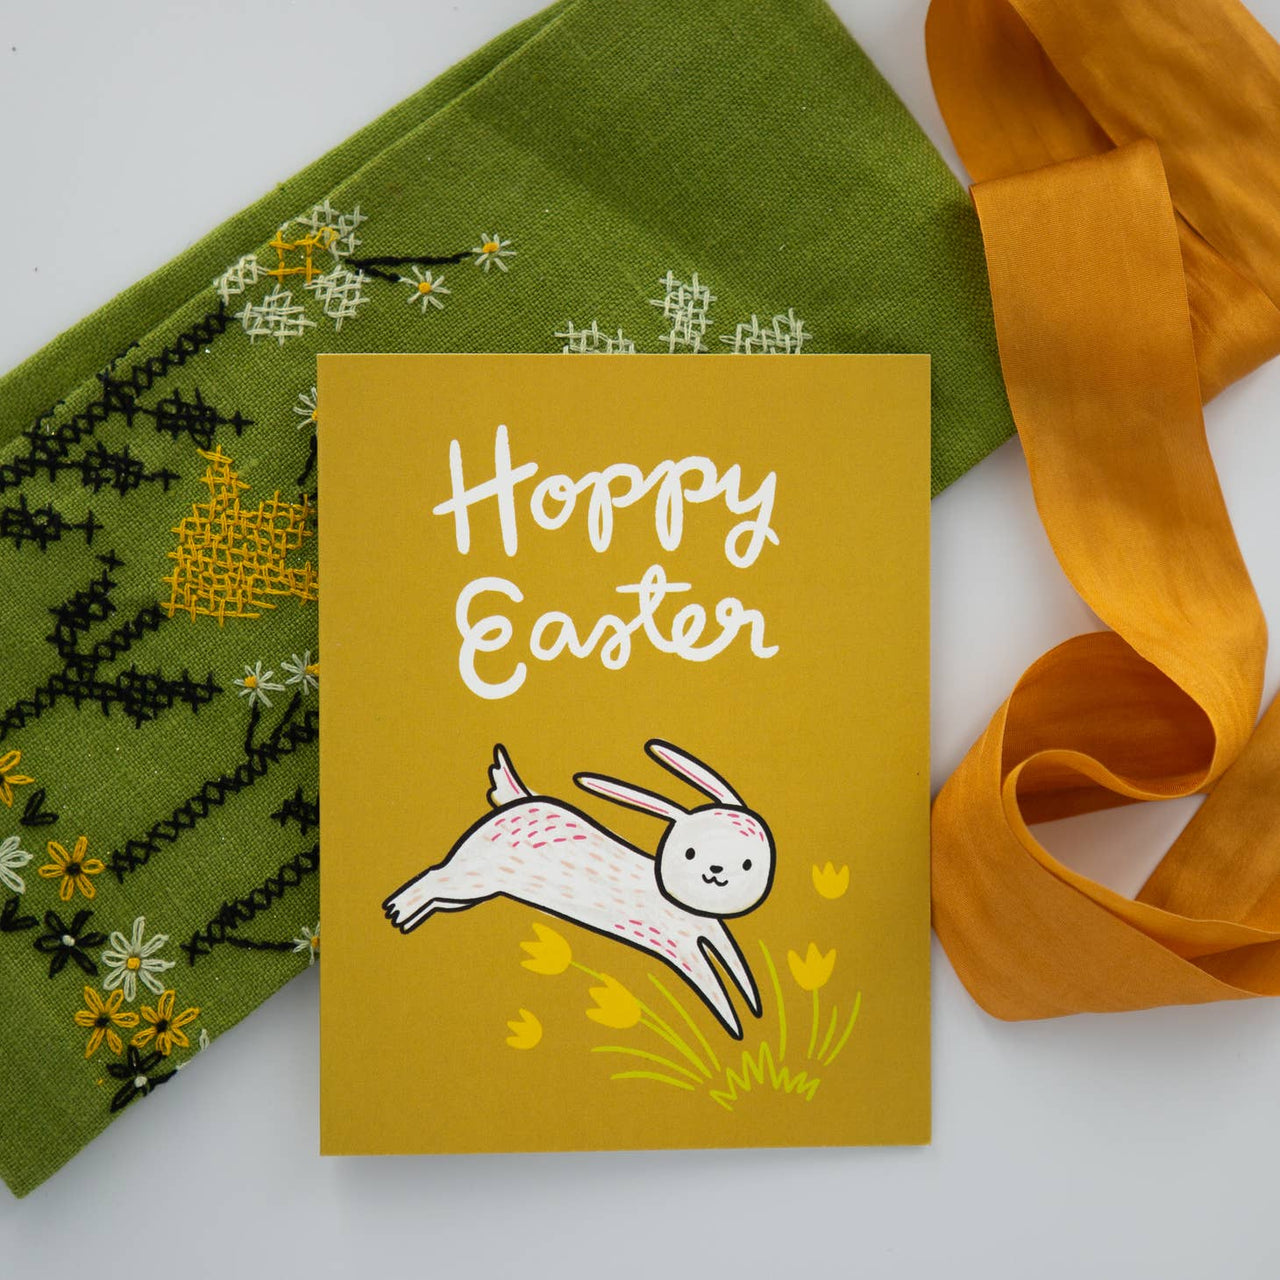 SALE - Abbie Ren - Happy Easter Bunny Greeting Card